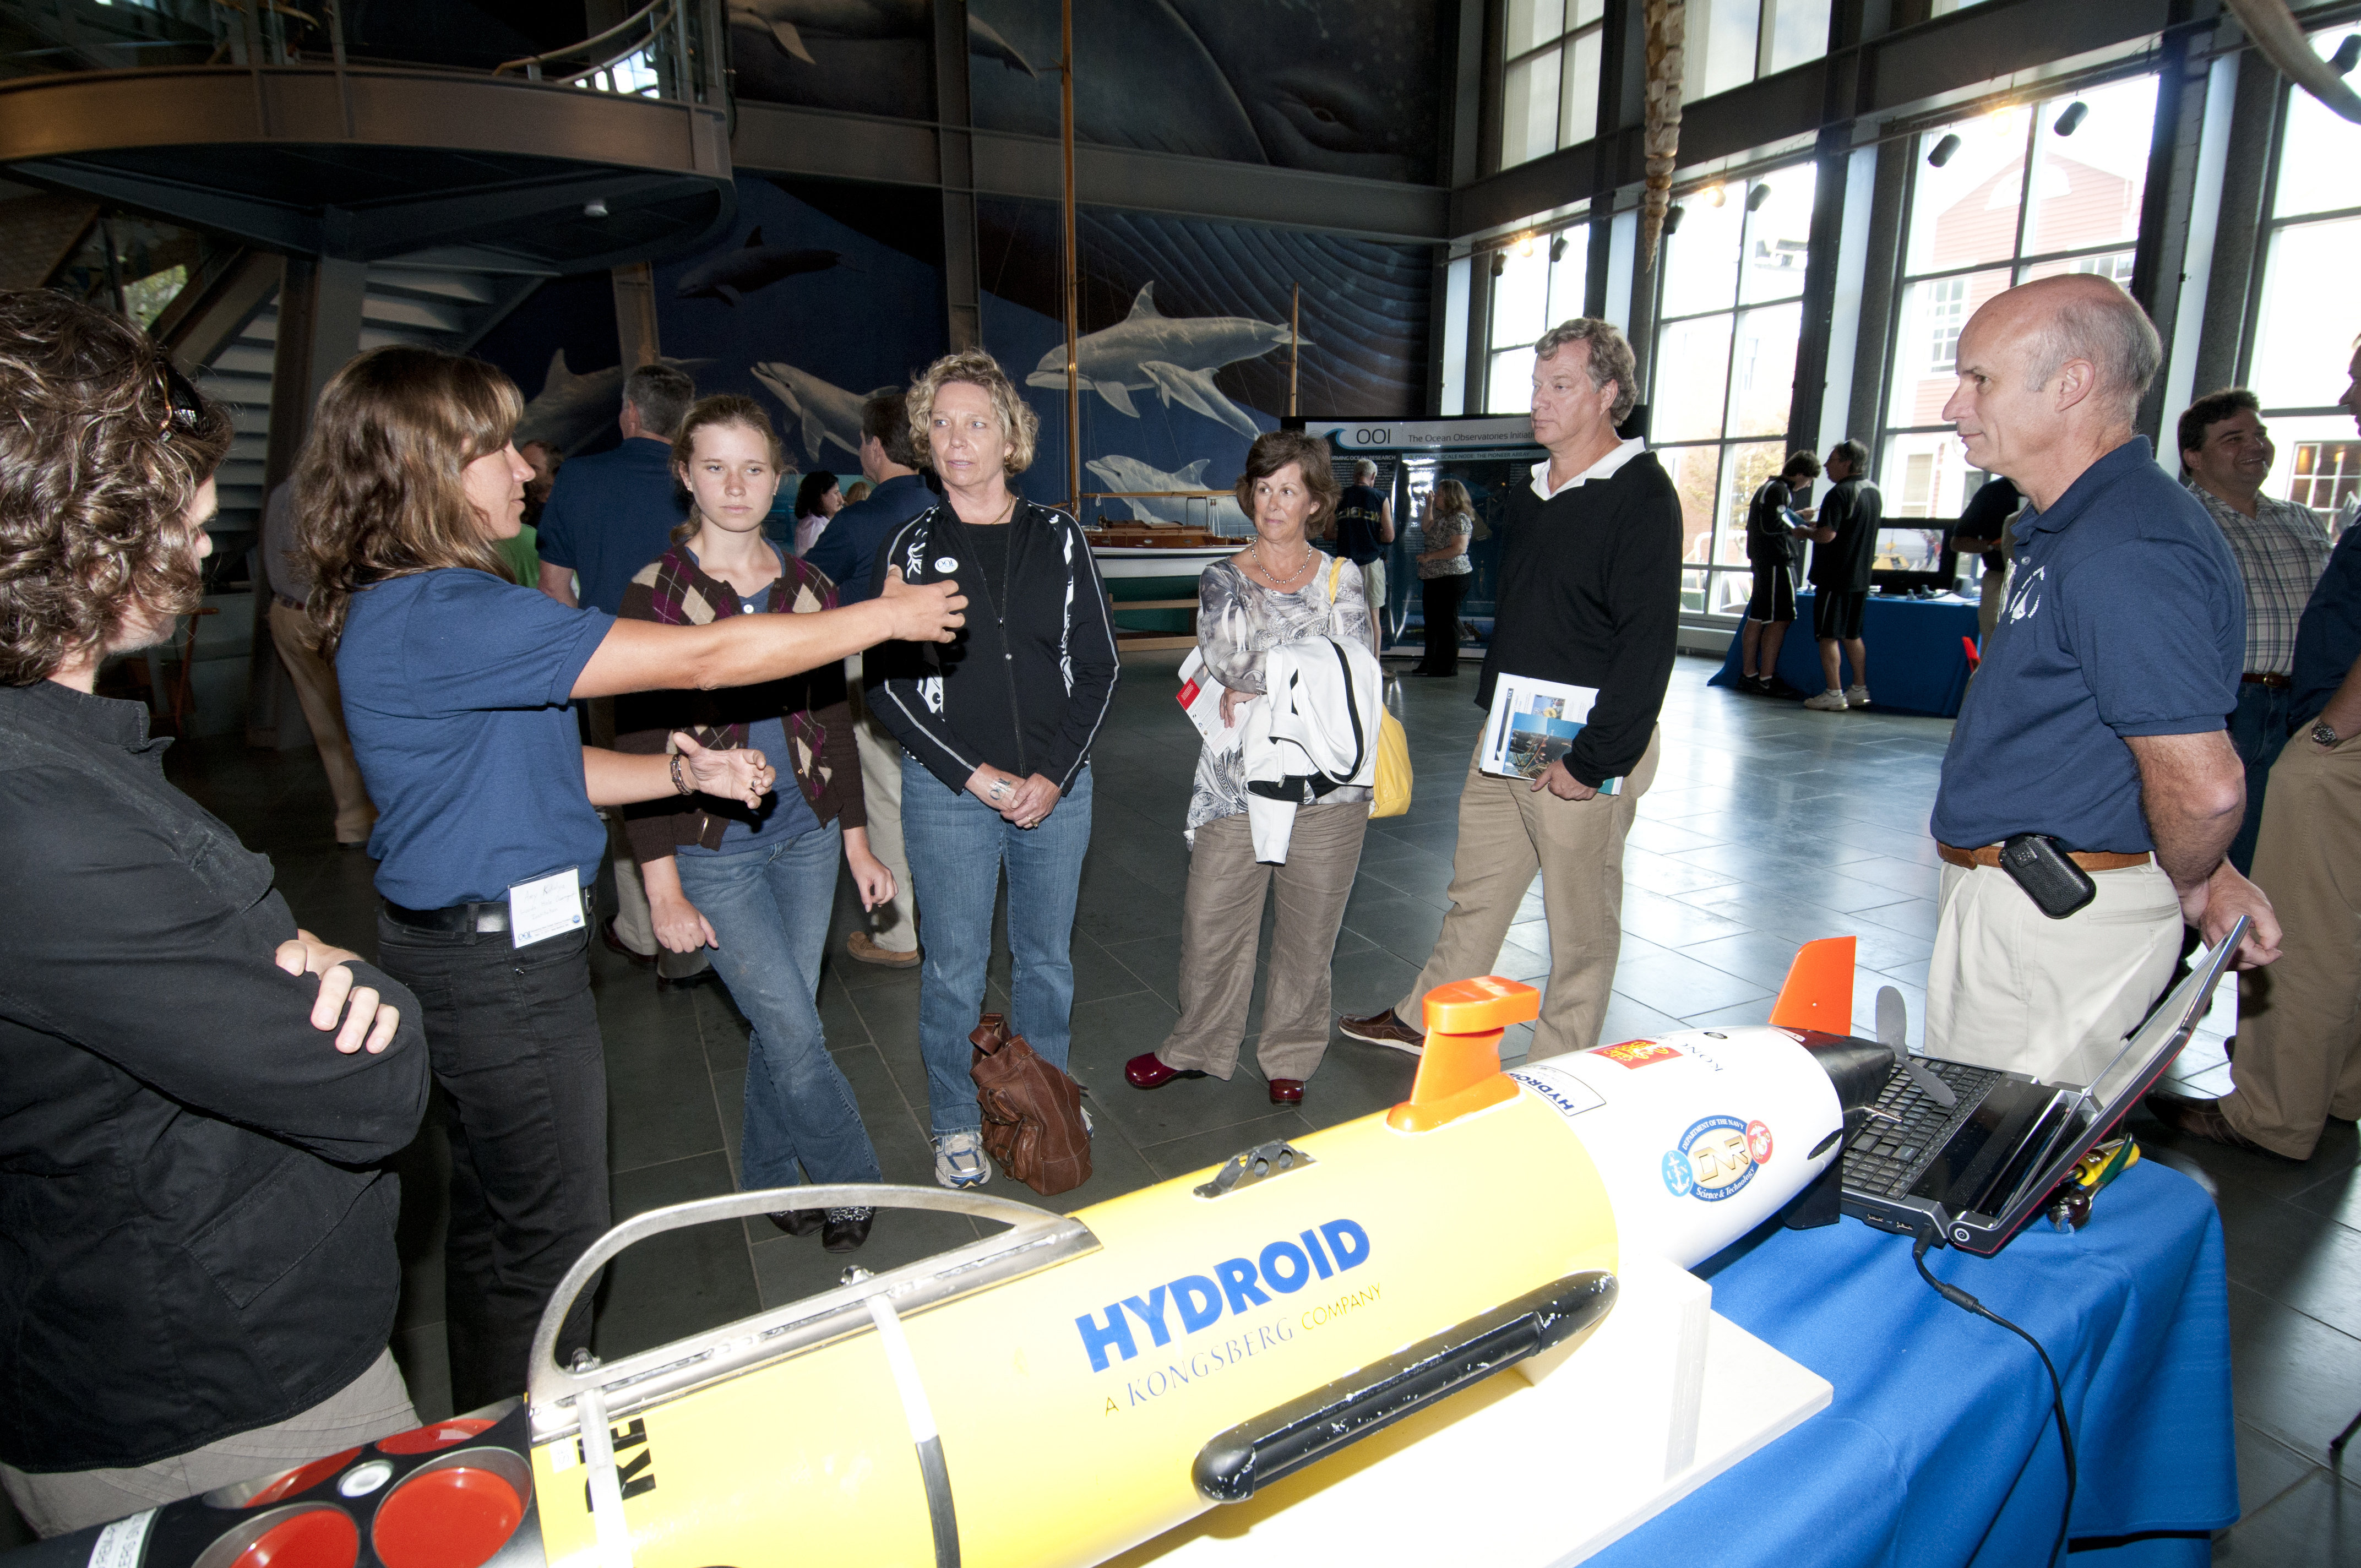 Amy Kukulya (second from left) and Al Pluddemann (right), both of Woods Hole Oceanographic Institution, discuss REMUS Autonomous Underwater Vehicle operations with visitors at an OOI community event at The New Bedford Whaling Museum. (Credit: Jayne Doucette, Woods Hole Oceanographic Institution)